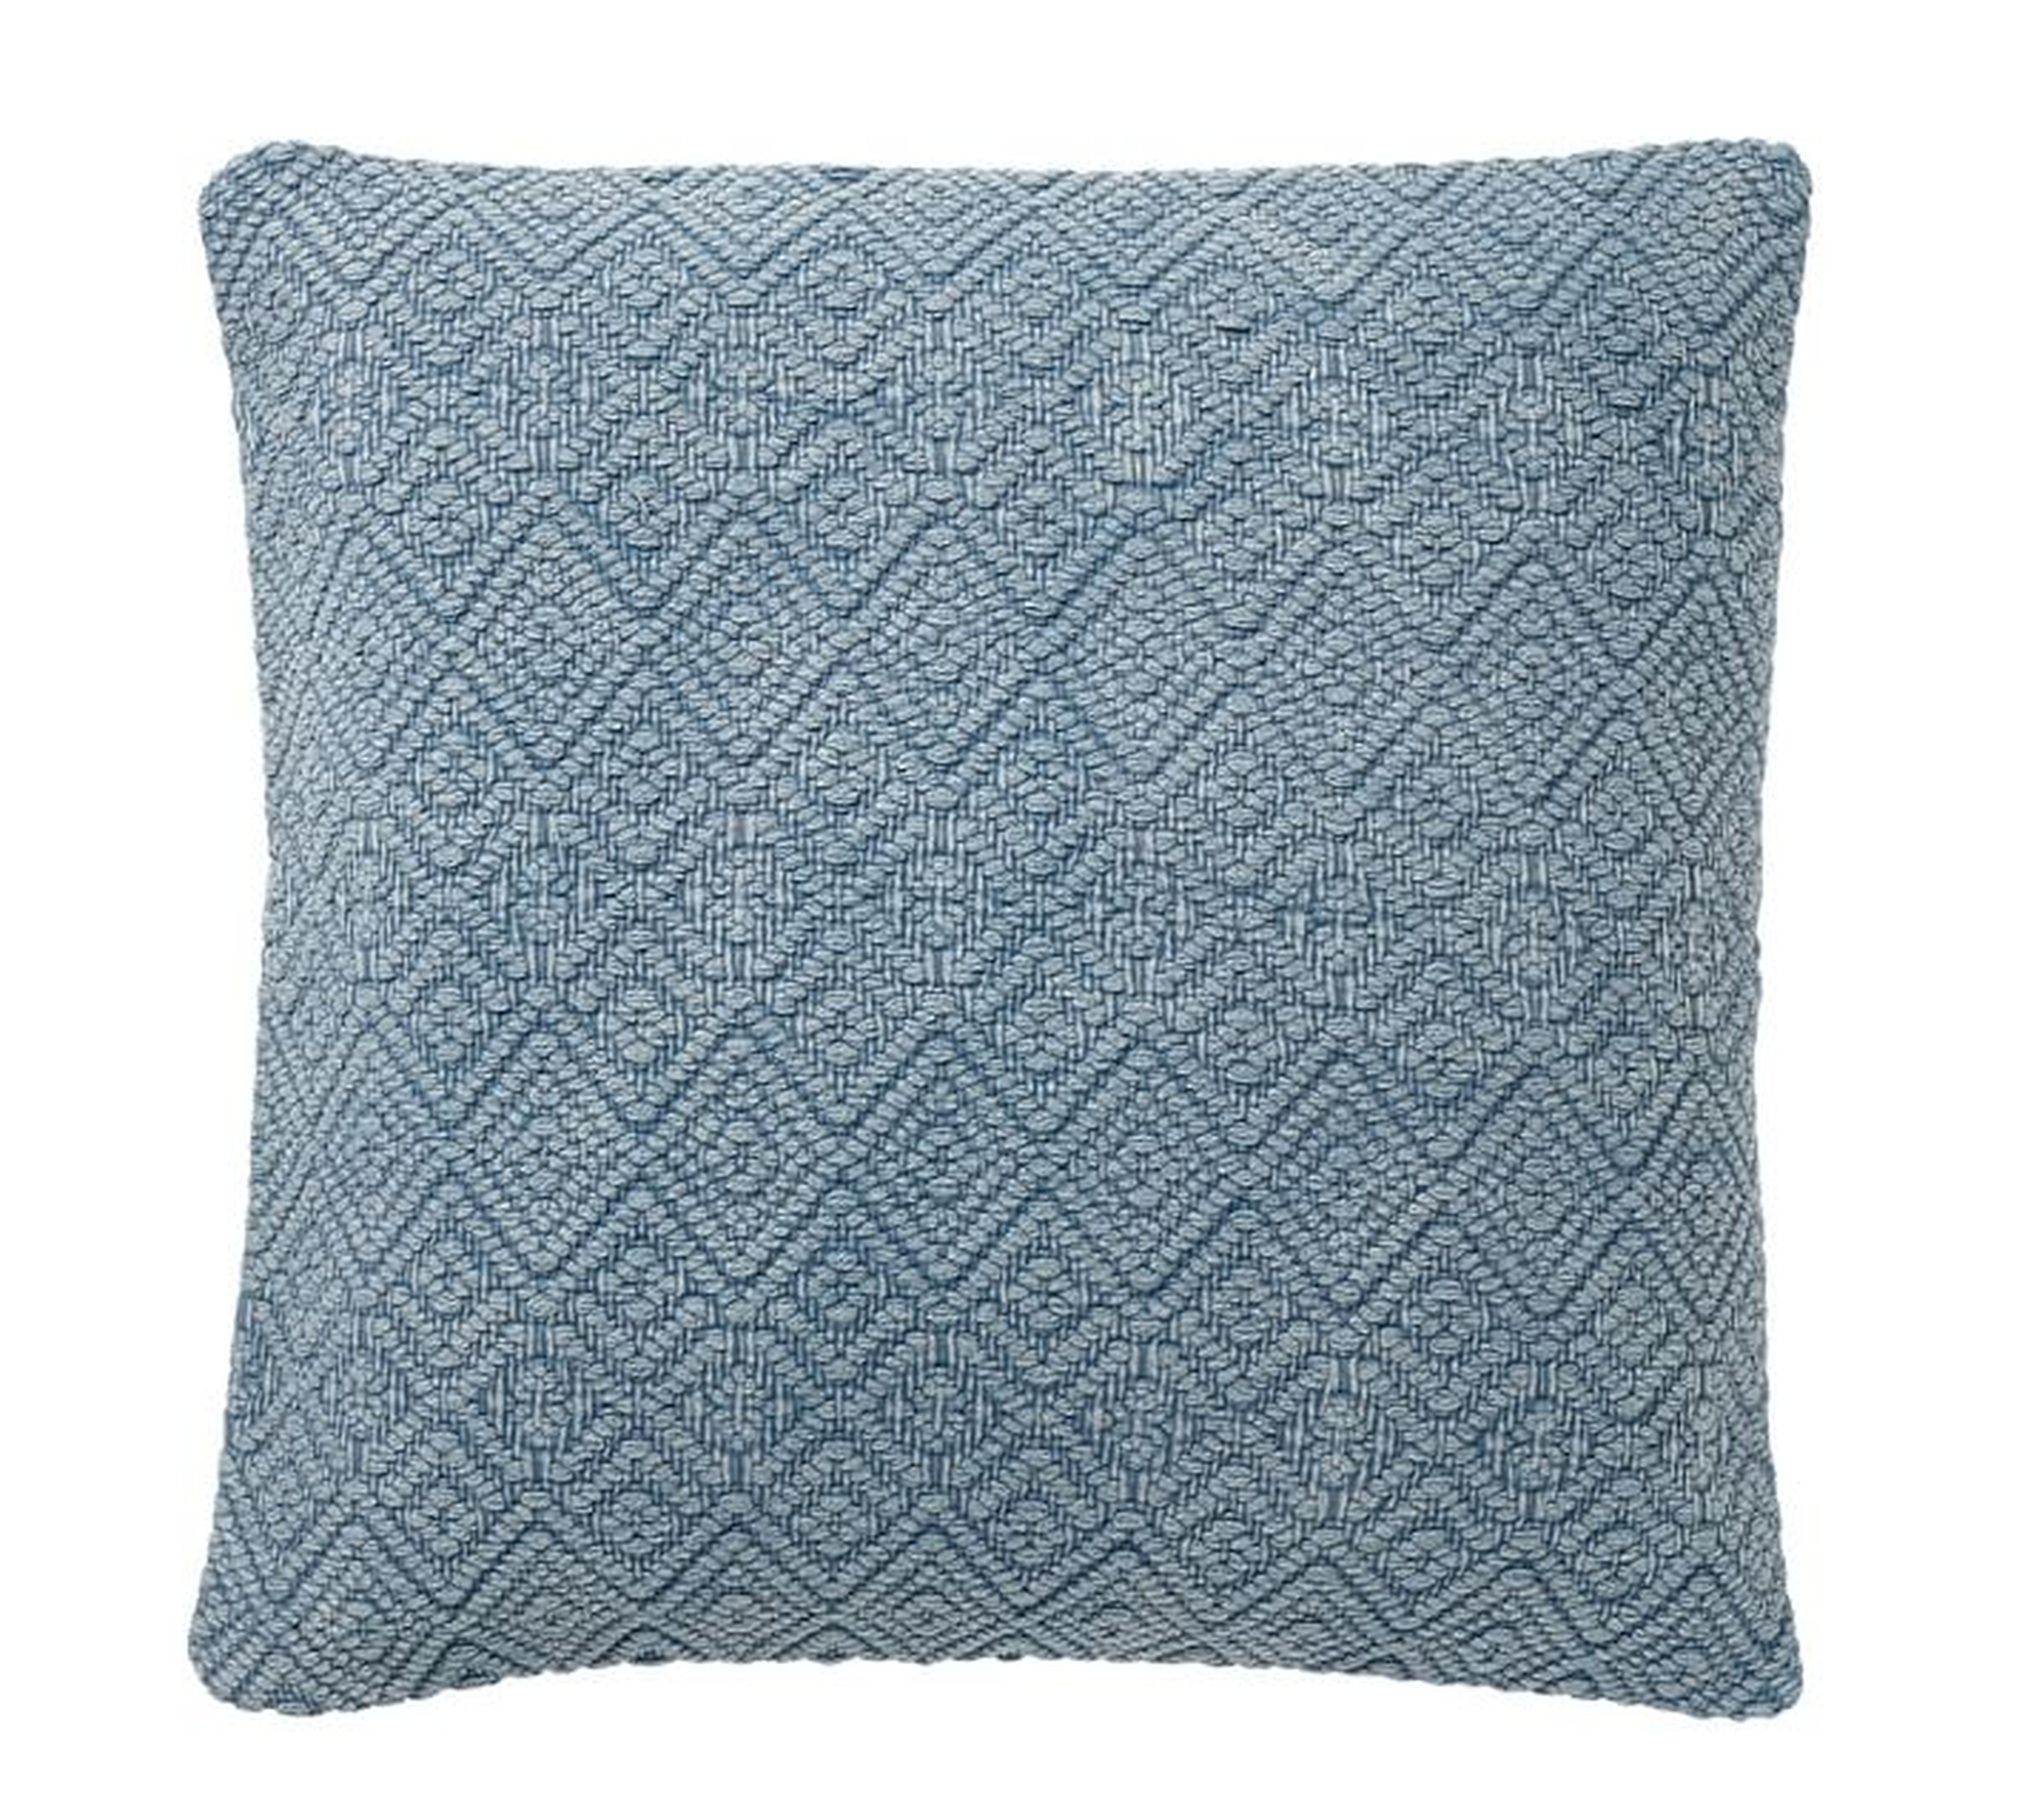 WASHED DIAMOND PILLOW COVER - Pottery Barn